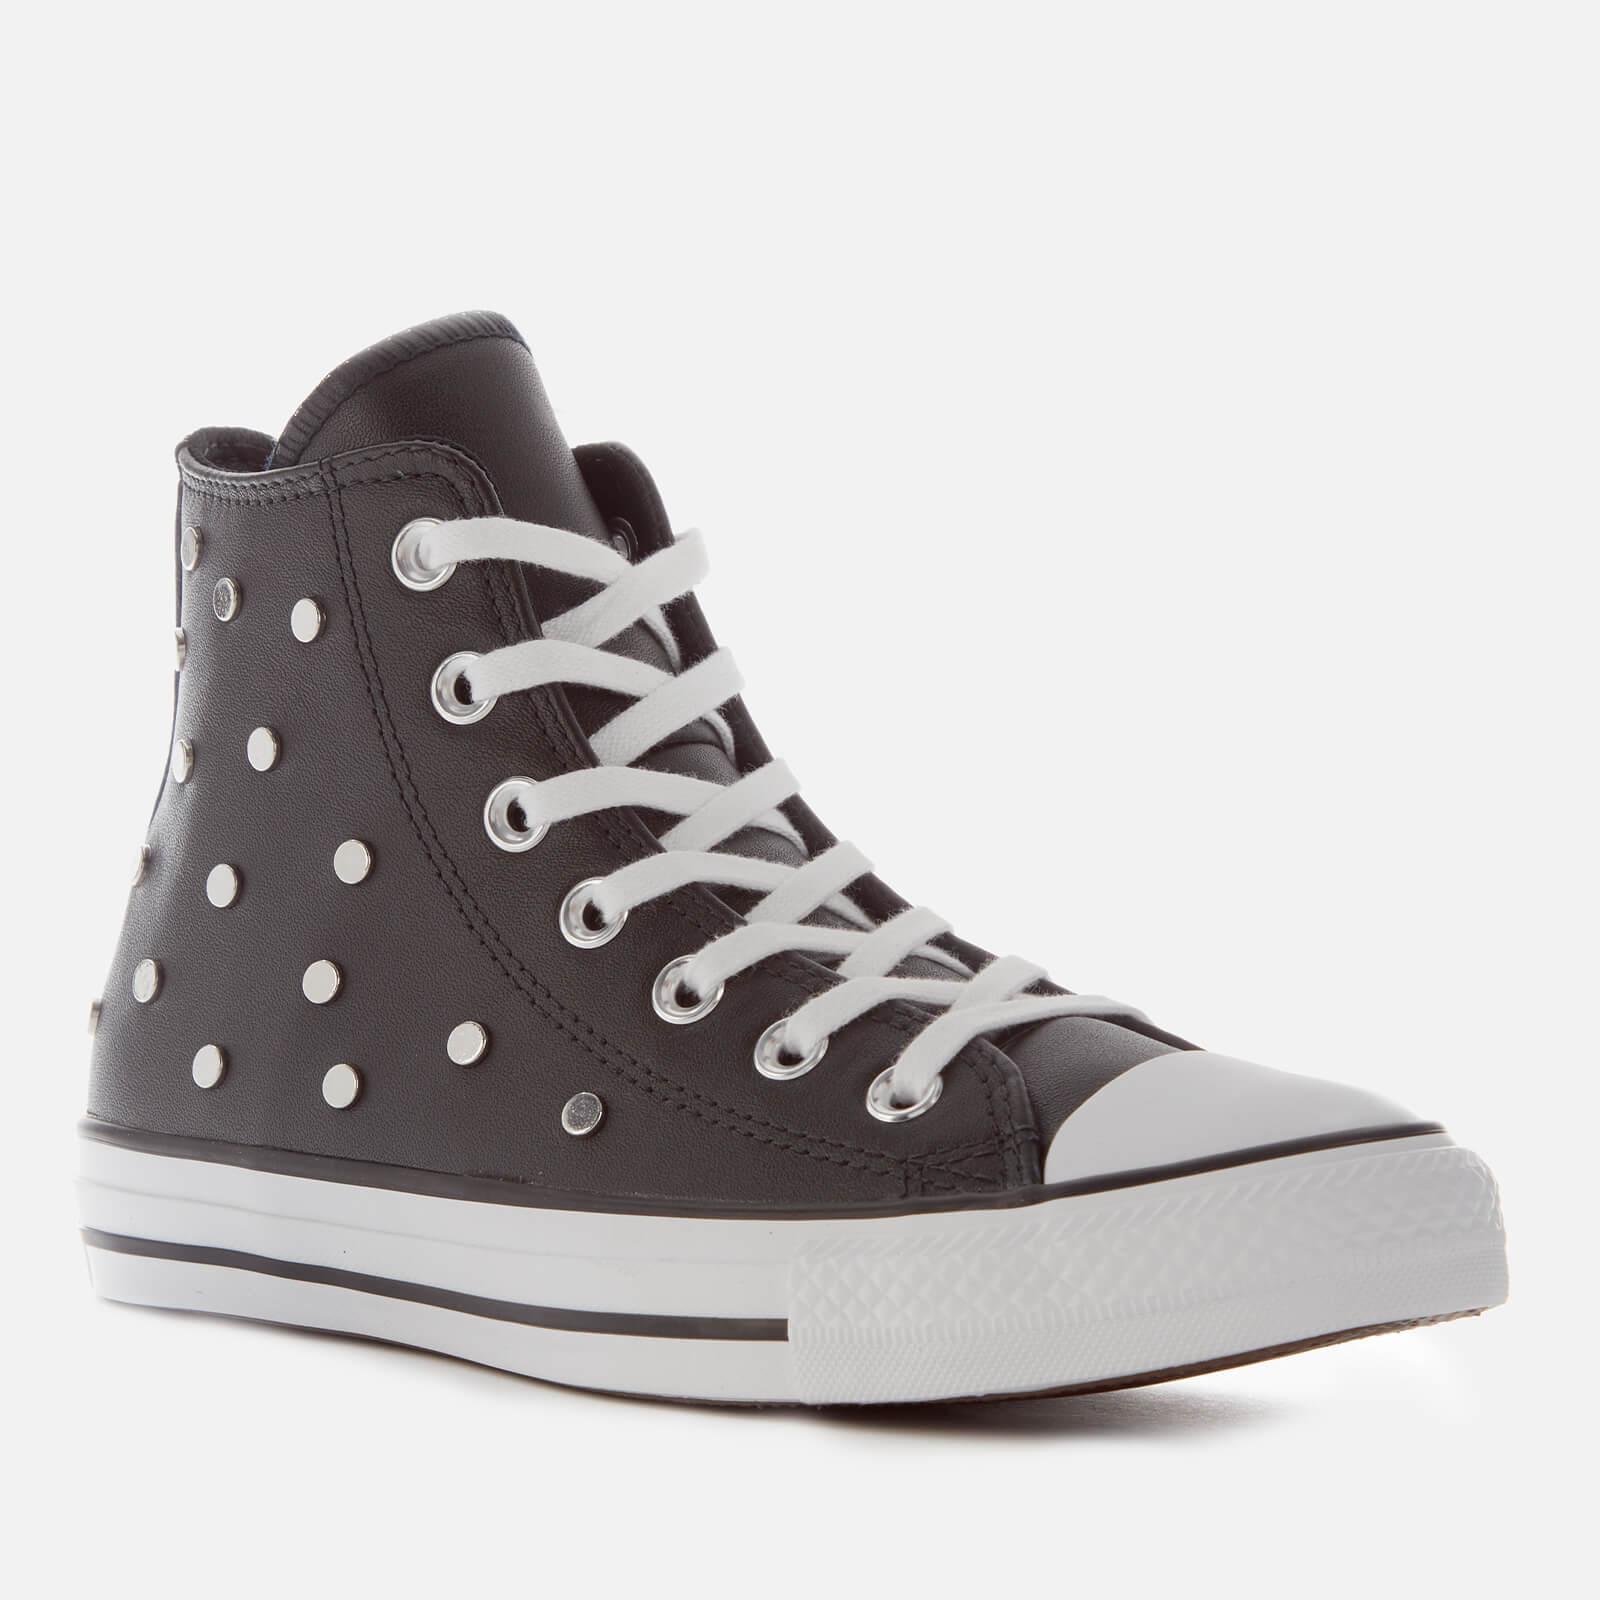 Converse Chuck Taylor All Star Studded Hi-top Trainers in Black | Lyst UK